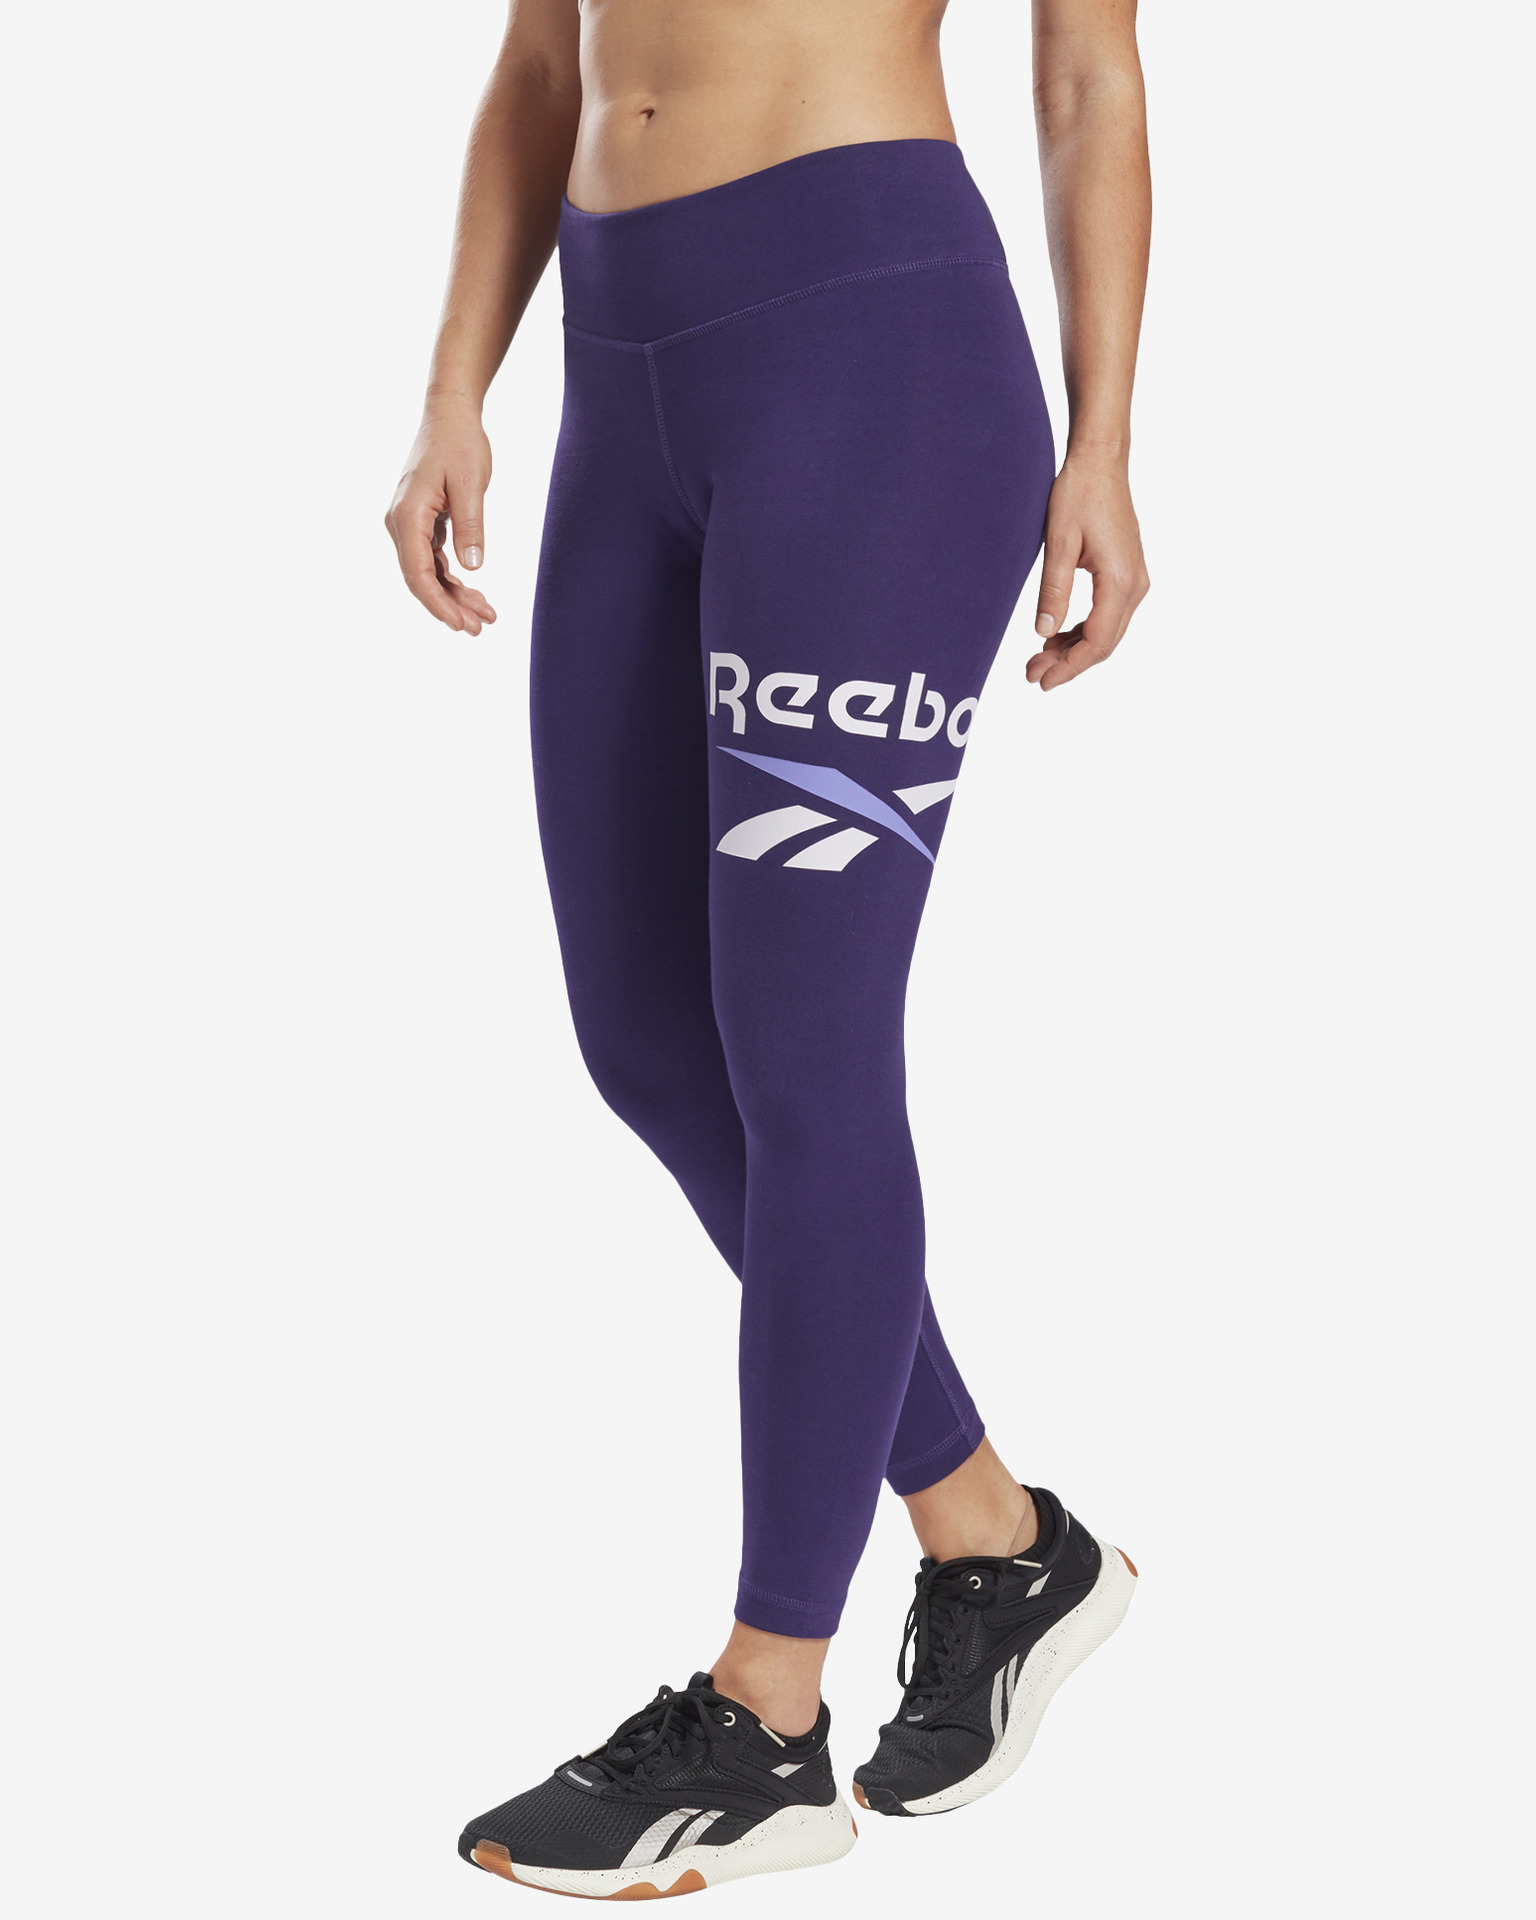 Reebok classics outfit | Sneaker outfits women, White sneakers outfit, Reebok  classic outfit